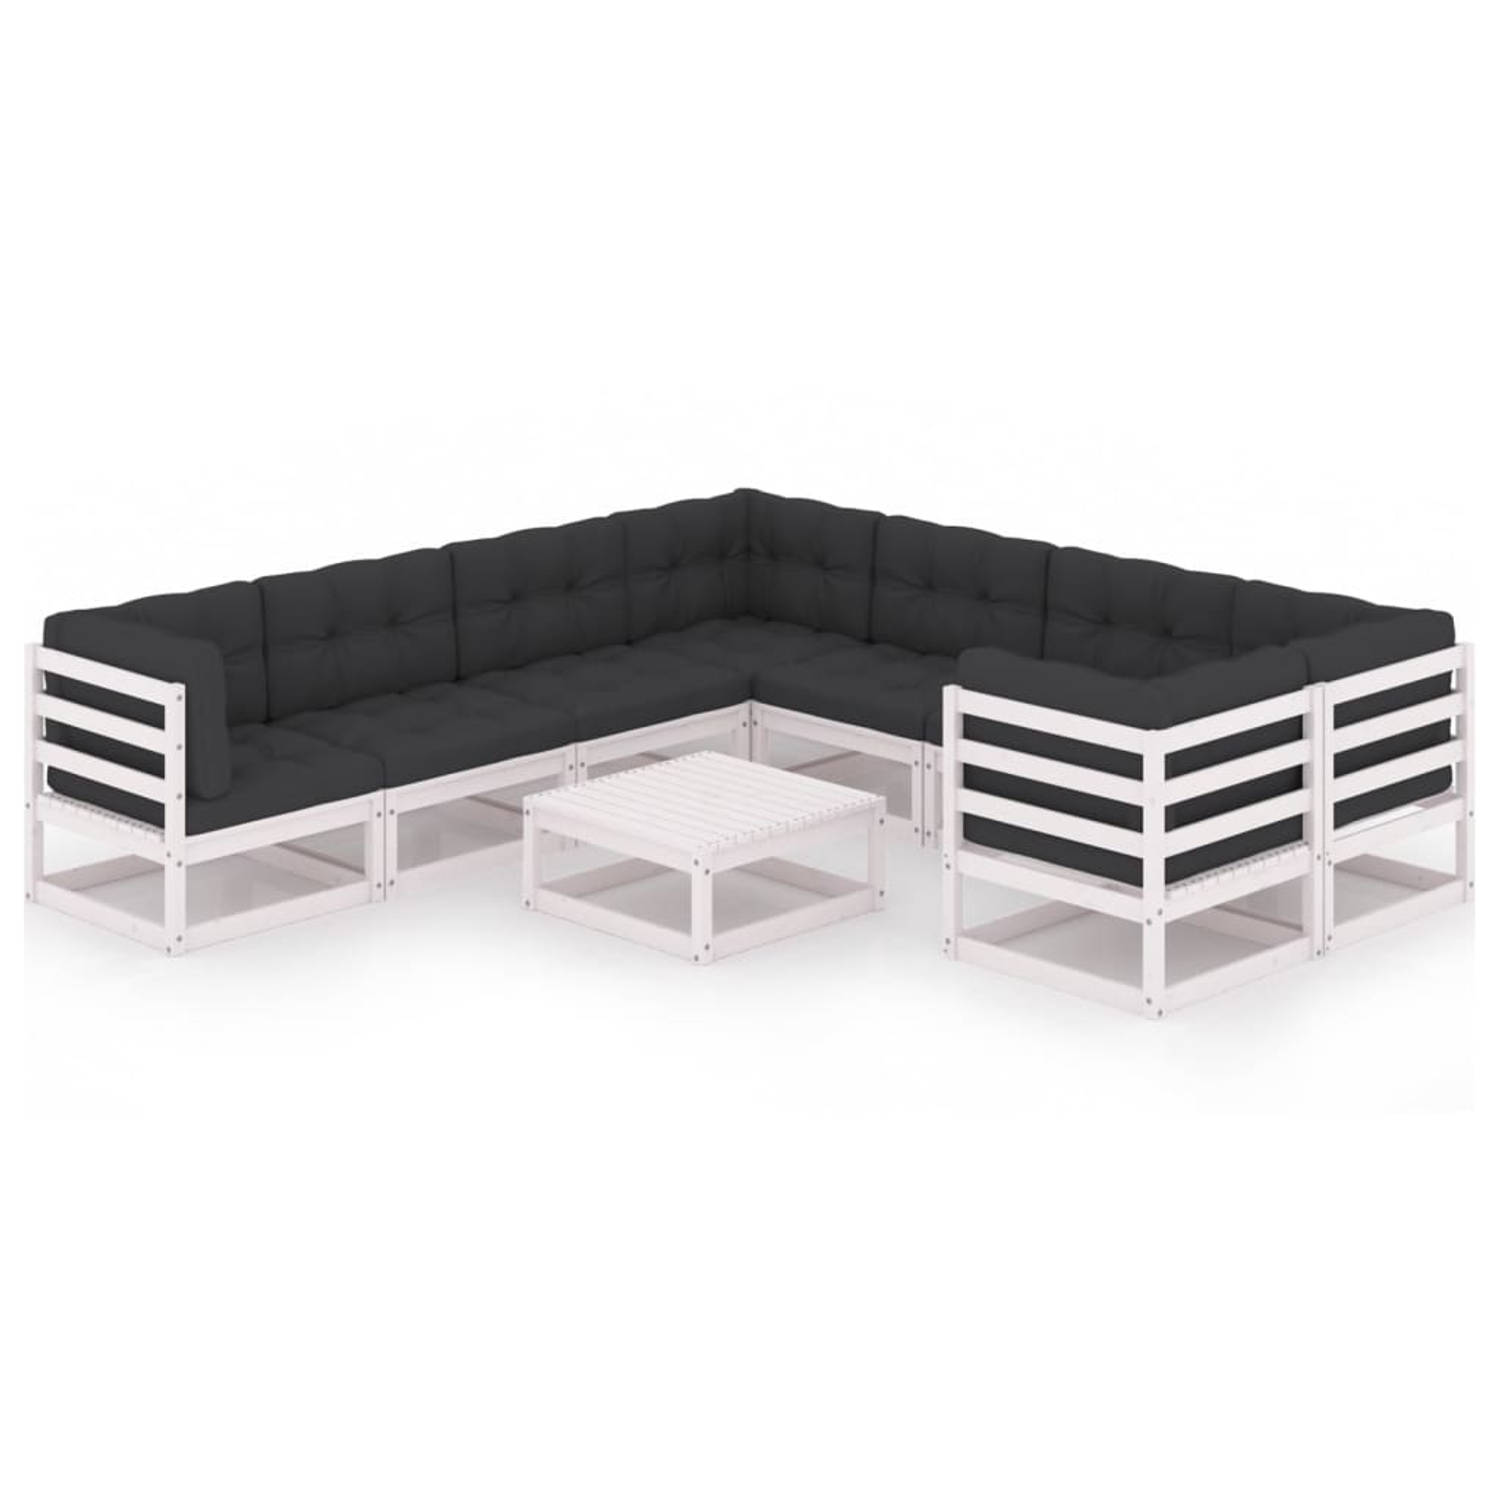 The Living Store Tuinset Grenenhout - Loungeset - 70x70x67 cm - Wit - Antraciet